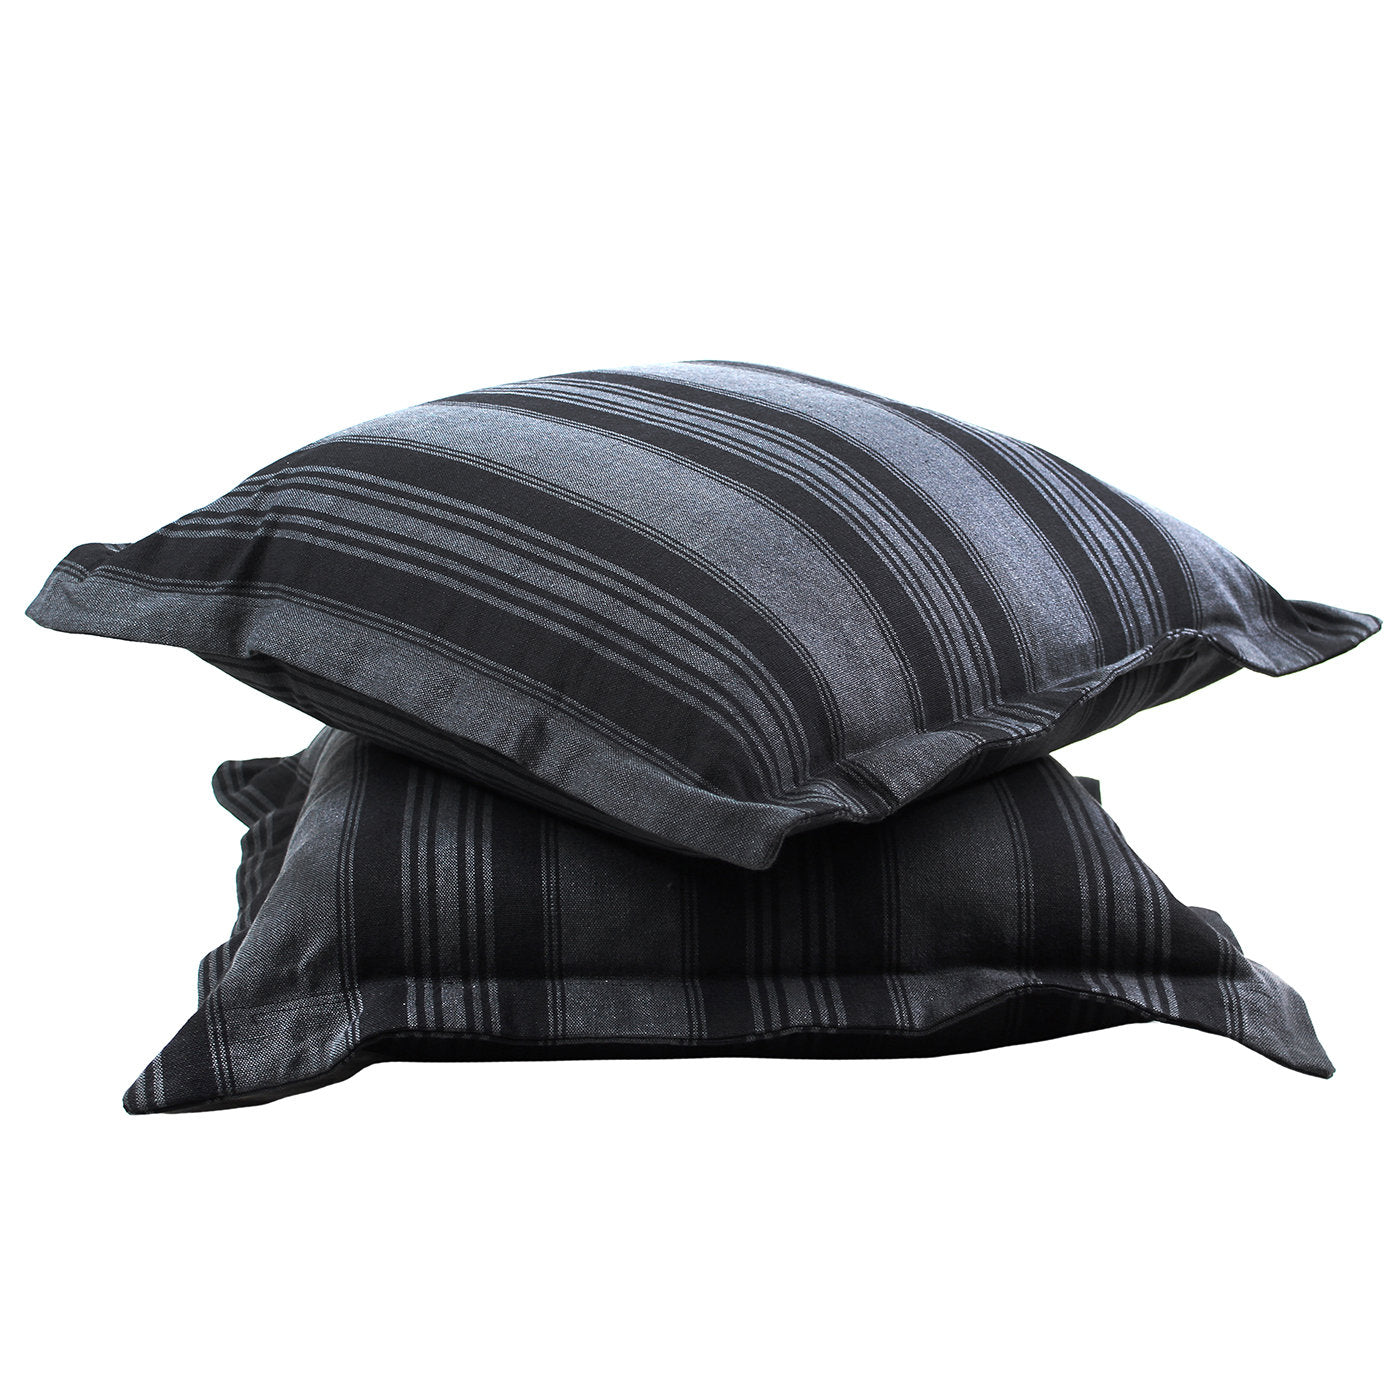 Set of 2 Black and Gray Stripes Cushions  - Alternative view 2